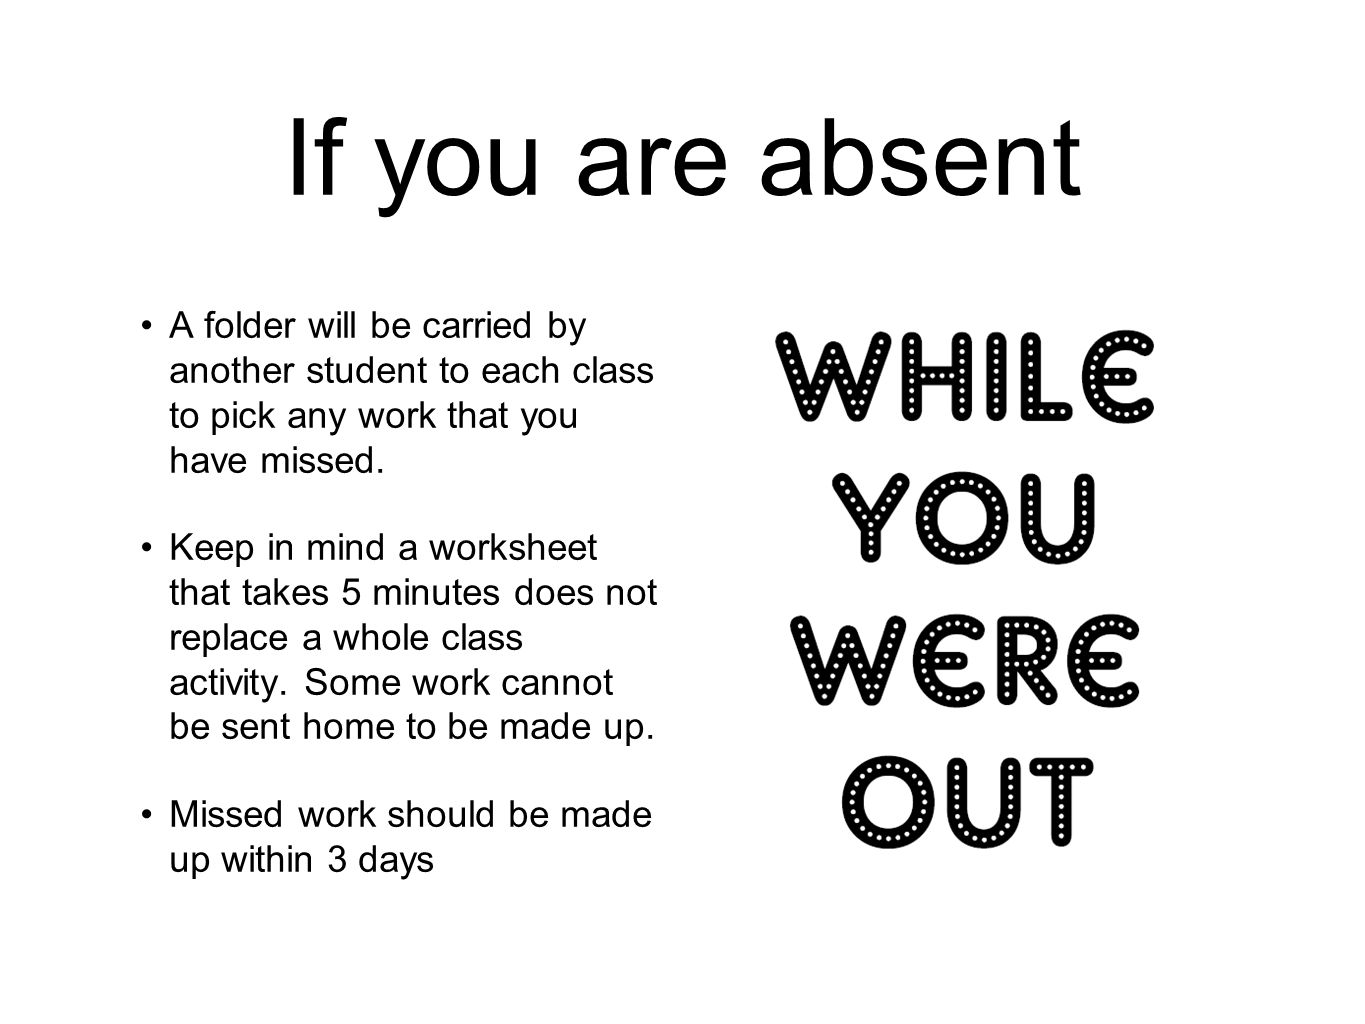 If you are absent A folder will be carried by another student to each class to pick any work that you have missed.